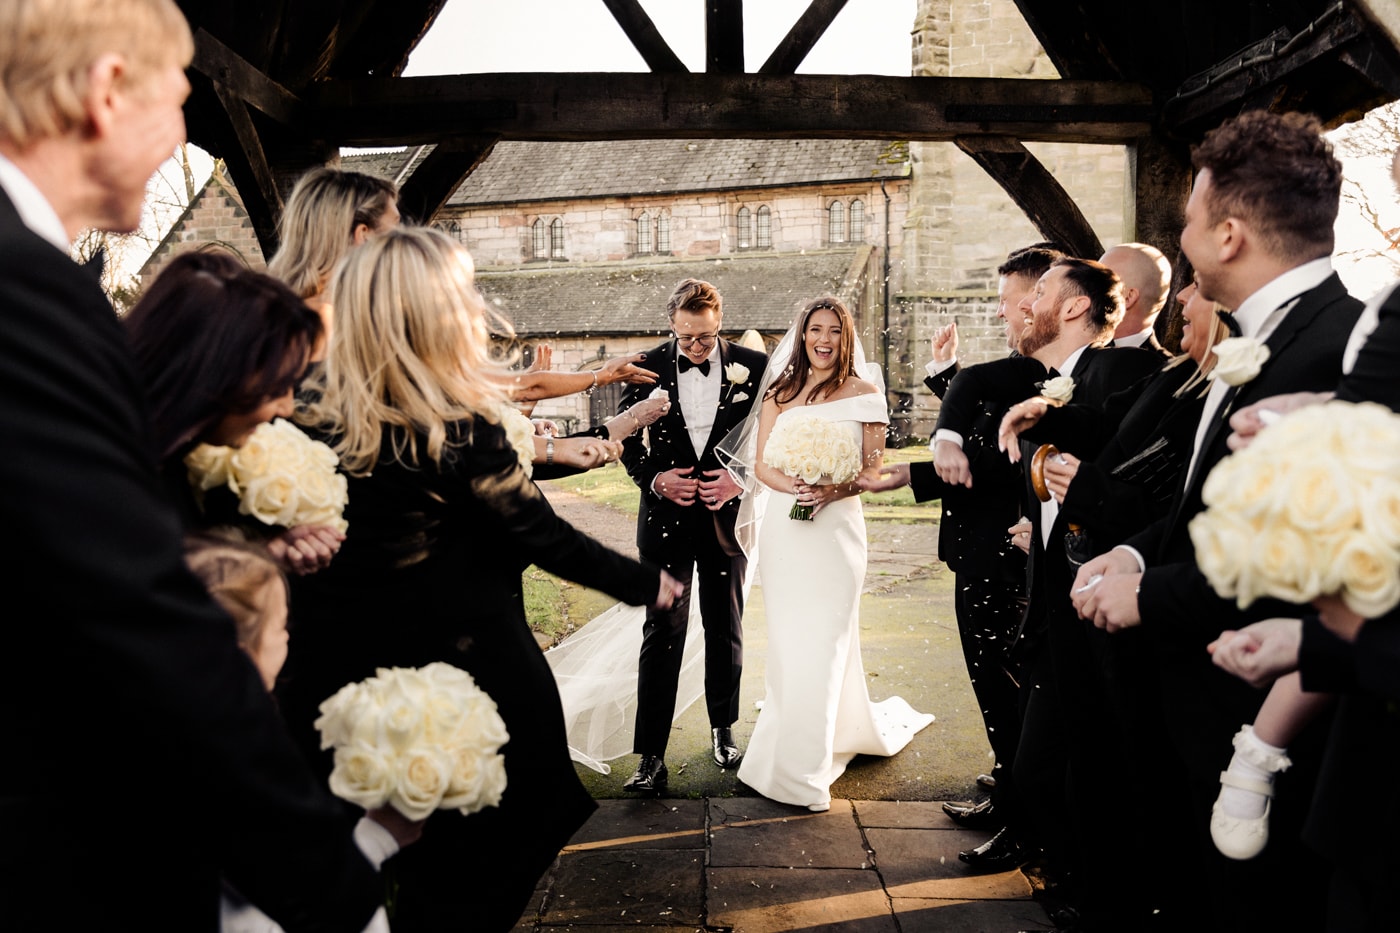 The church inn mobberley wedding and reception. Small intimate wedding in cheshire.